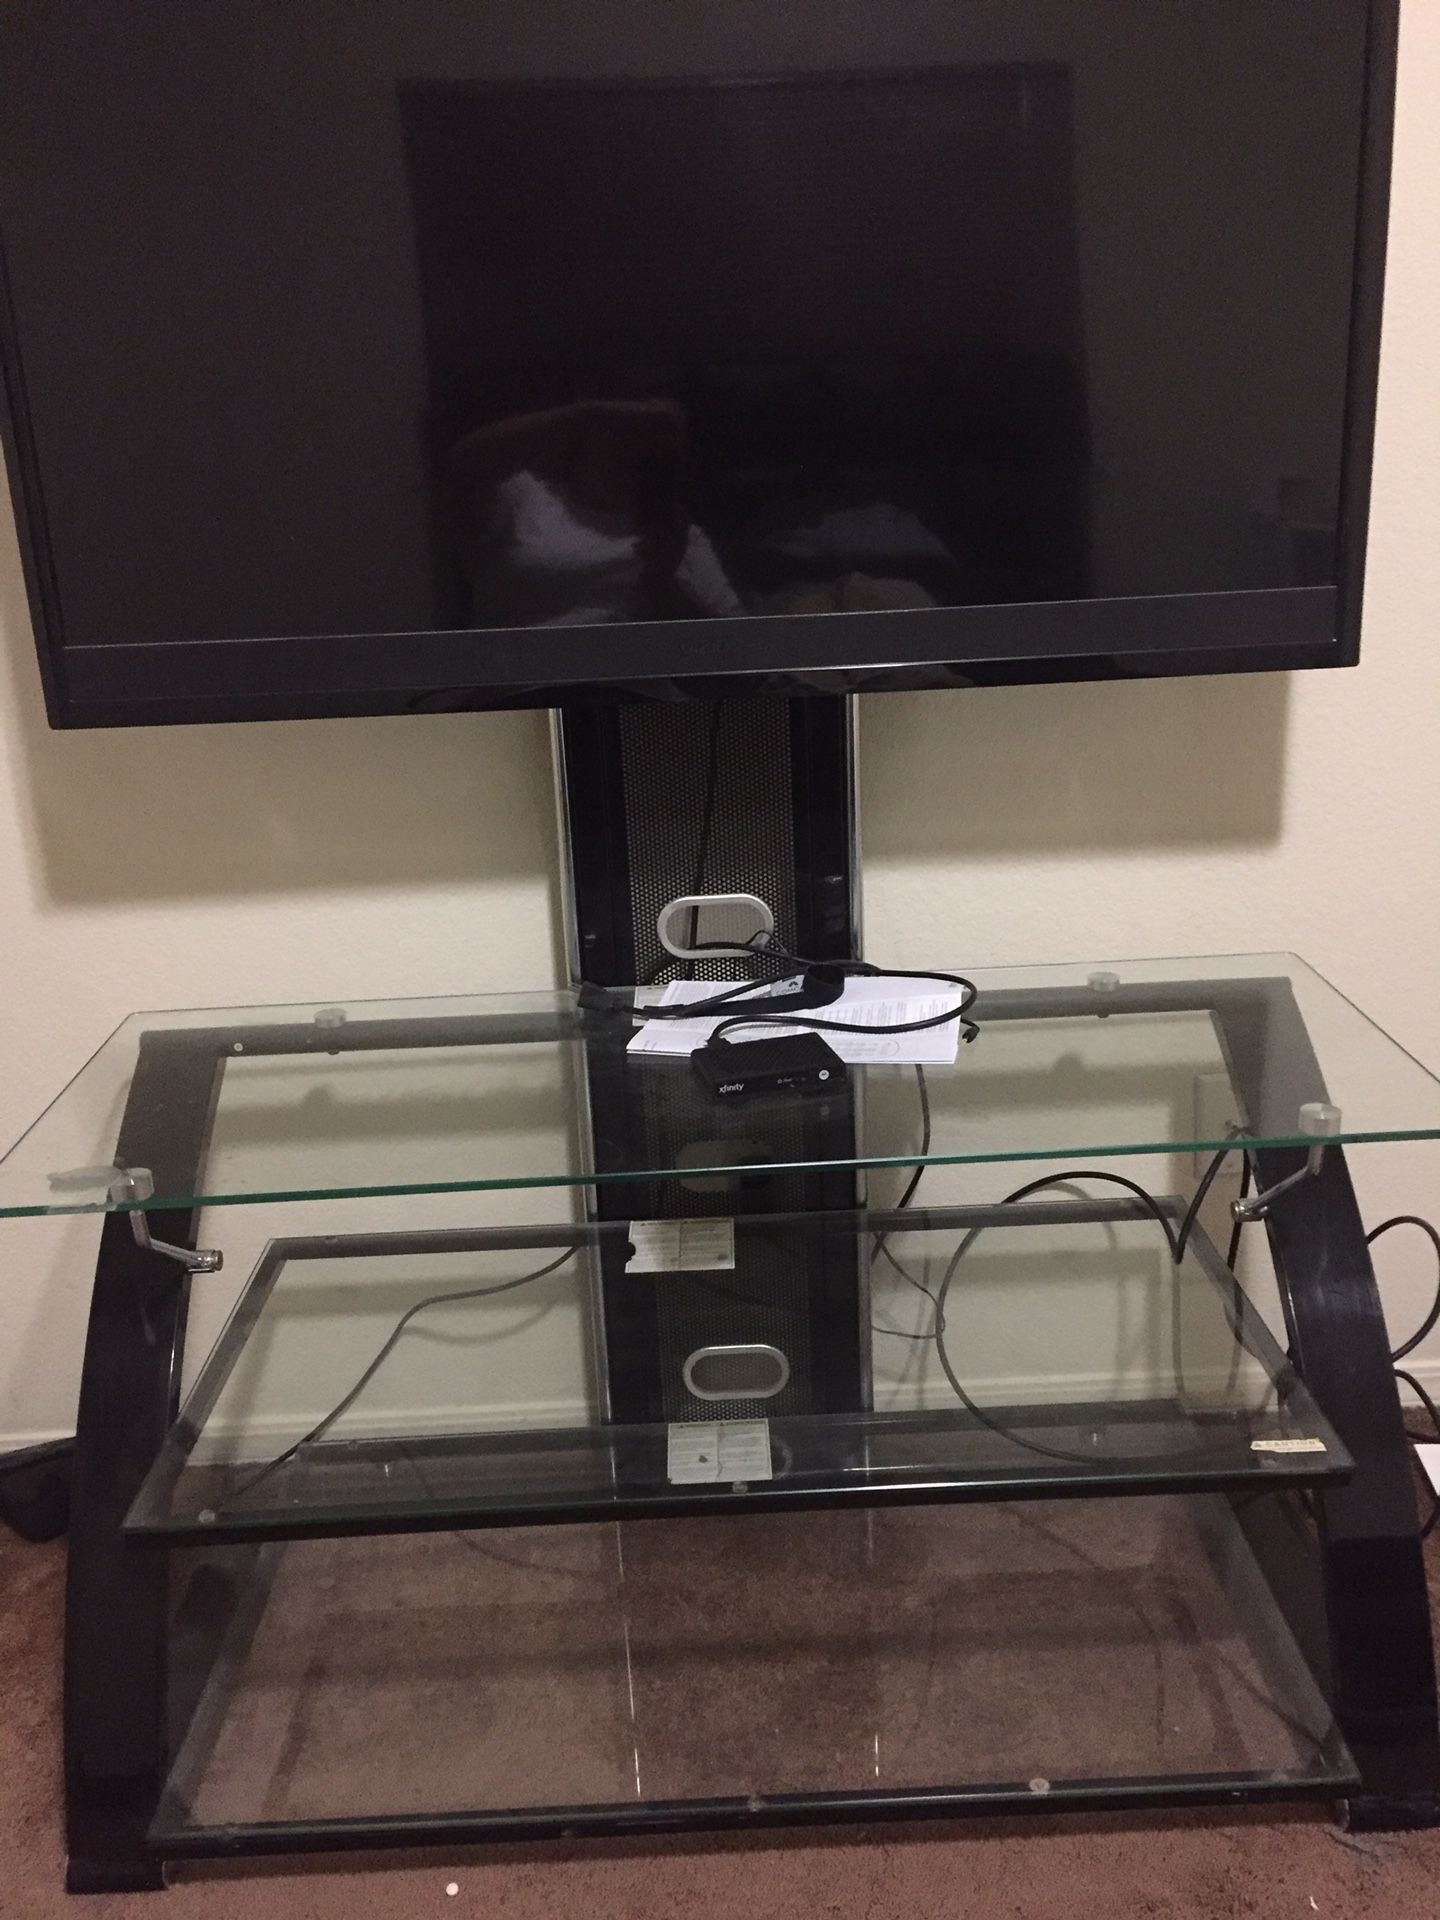 Tv stand and tv both